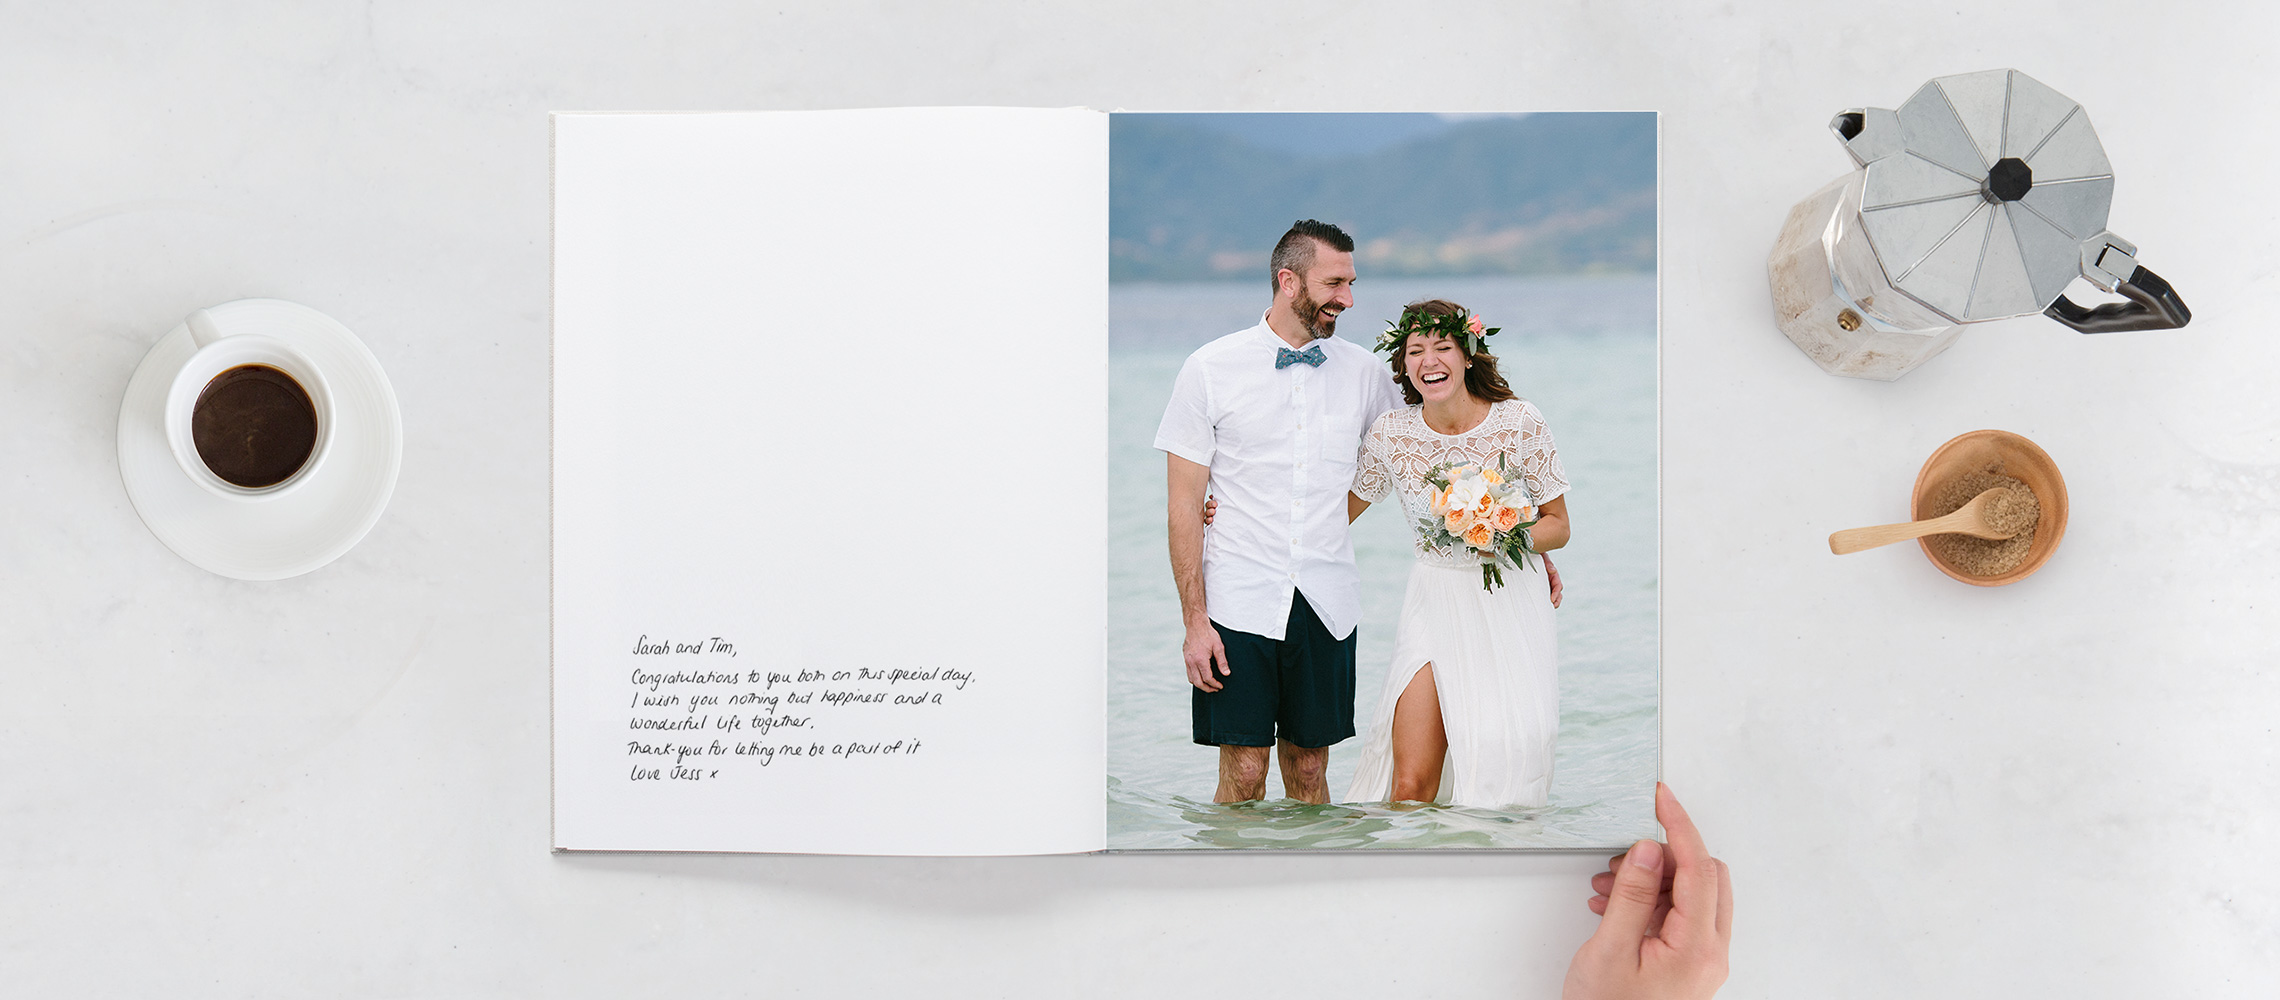 Portrait photo book showing a open spread with wedding image on the right page and a handwritten note on the left page